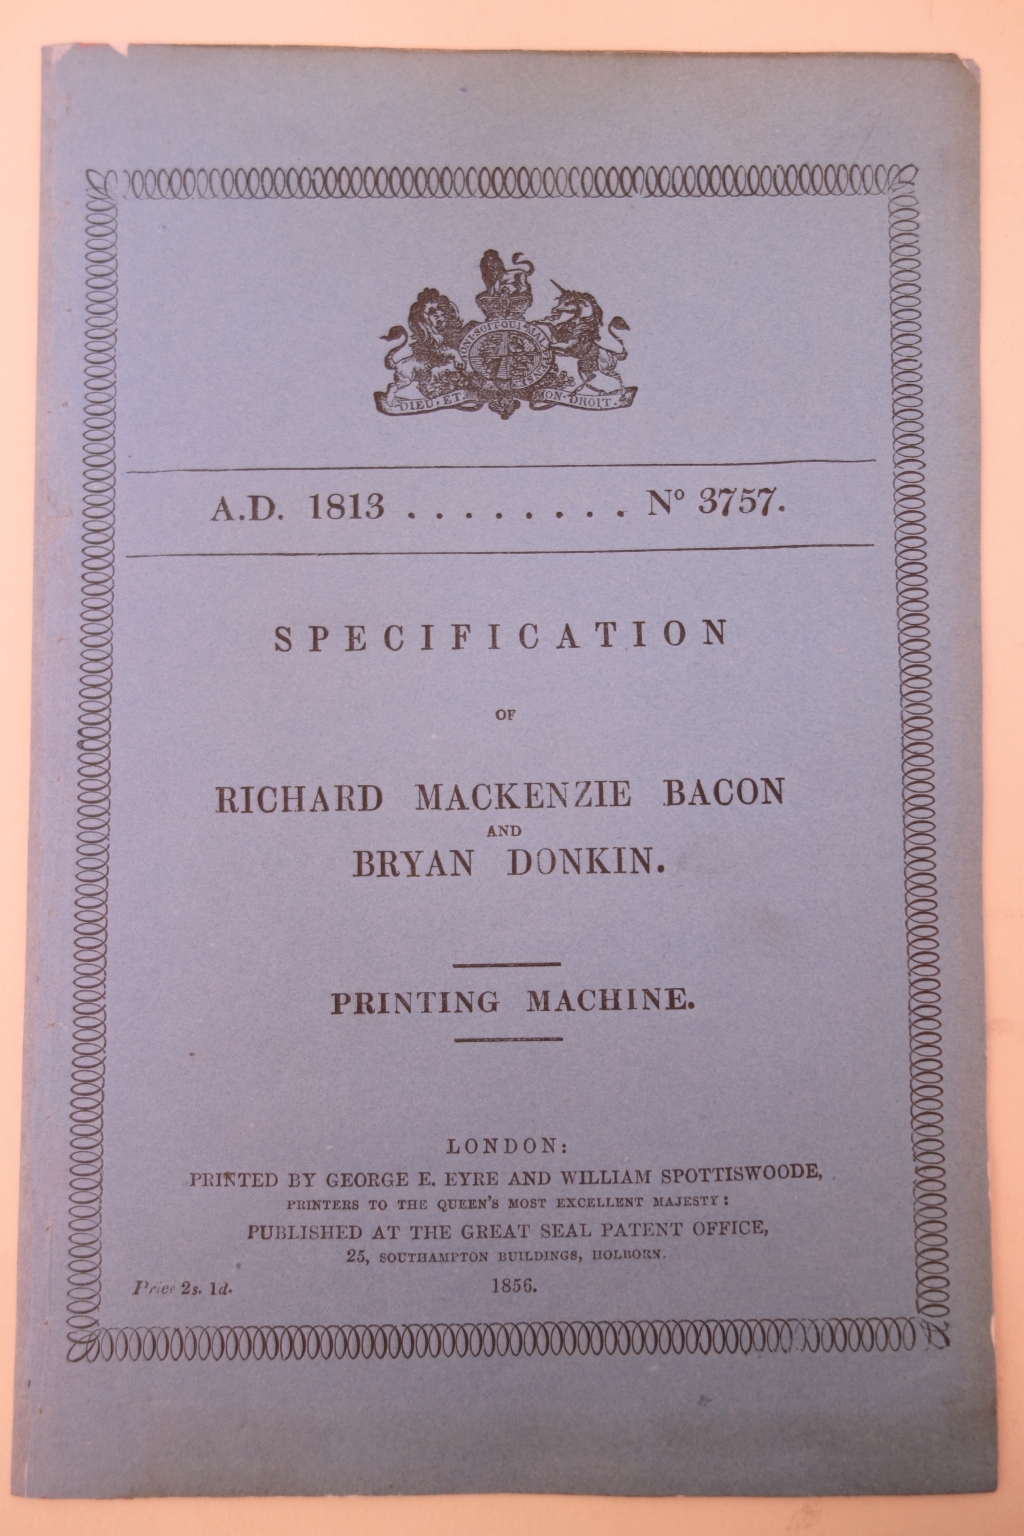 Bacon and Donking patent for printing machine cover